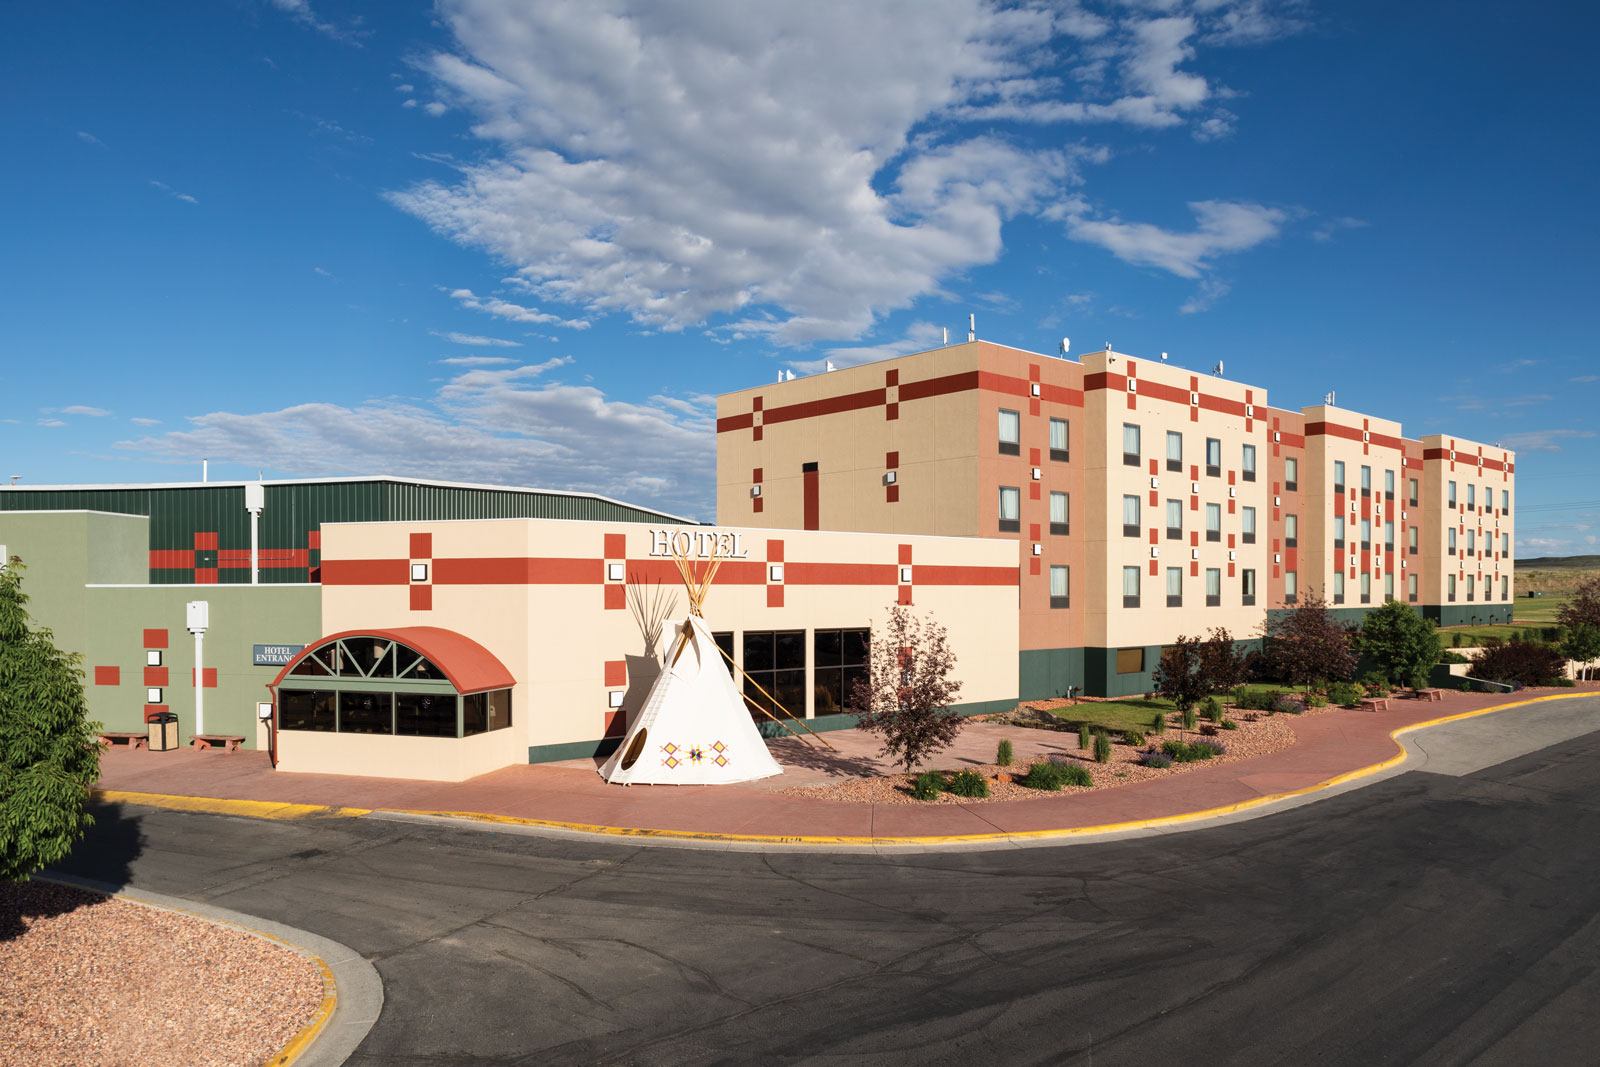 wind river casino hotel reservations